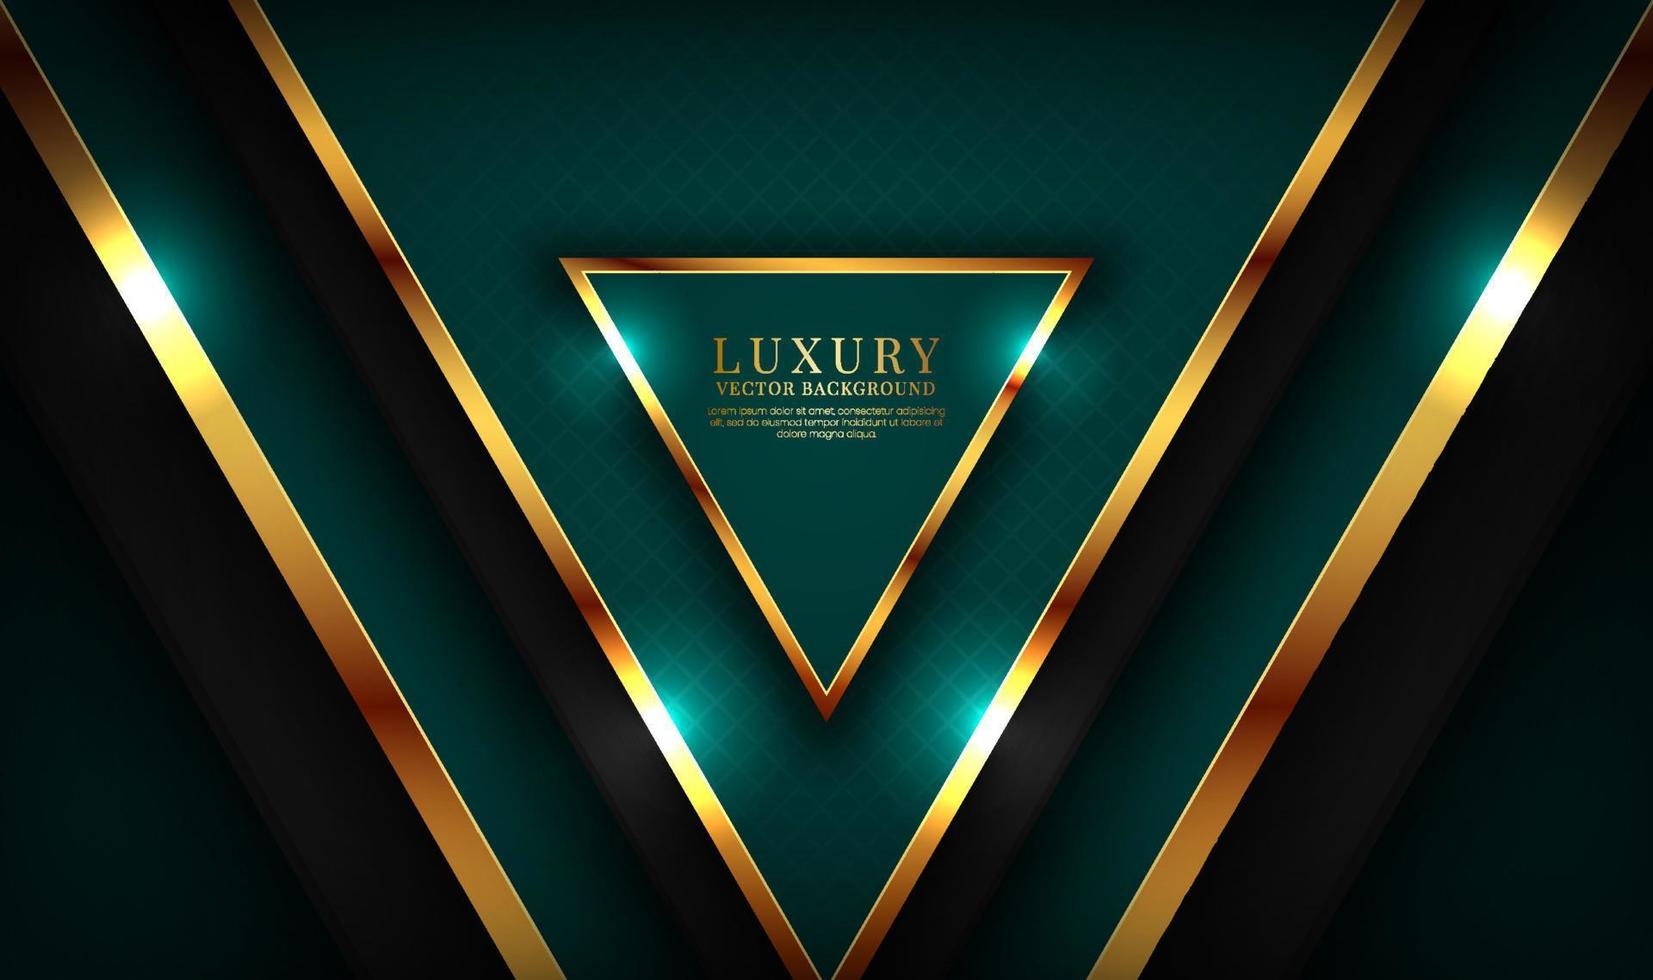 3D green luxury abstract background overlap layer on dark space with golden triangle effect decoration. Graphic design element elegant style concept for flyer, banner, brochure cover, or landing page vector